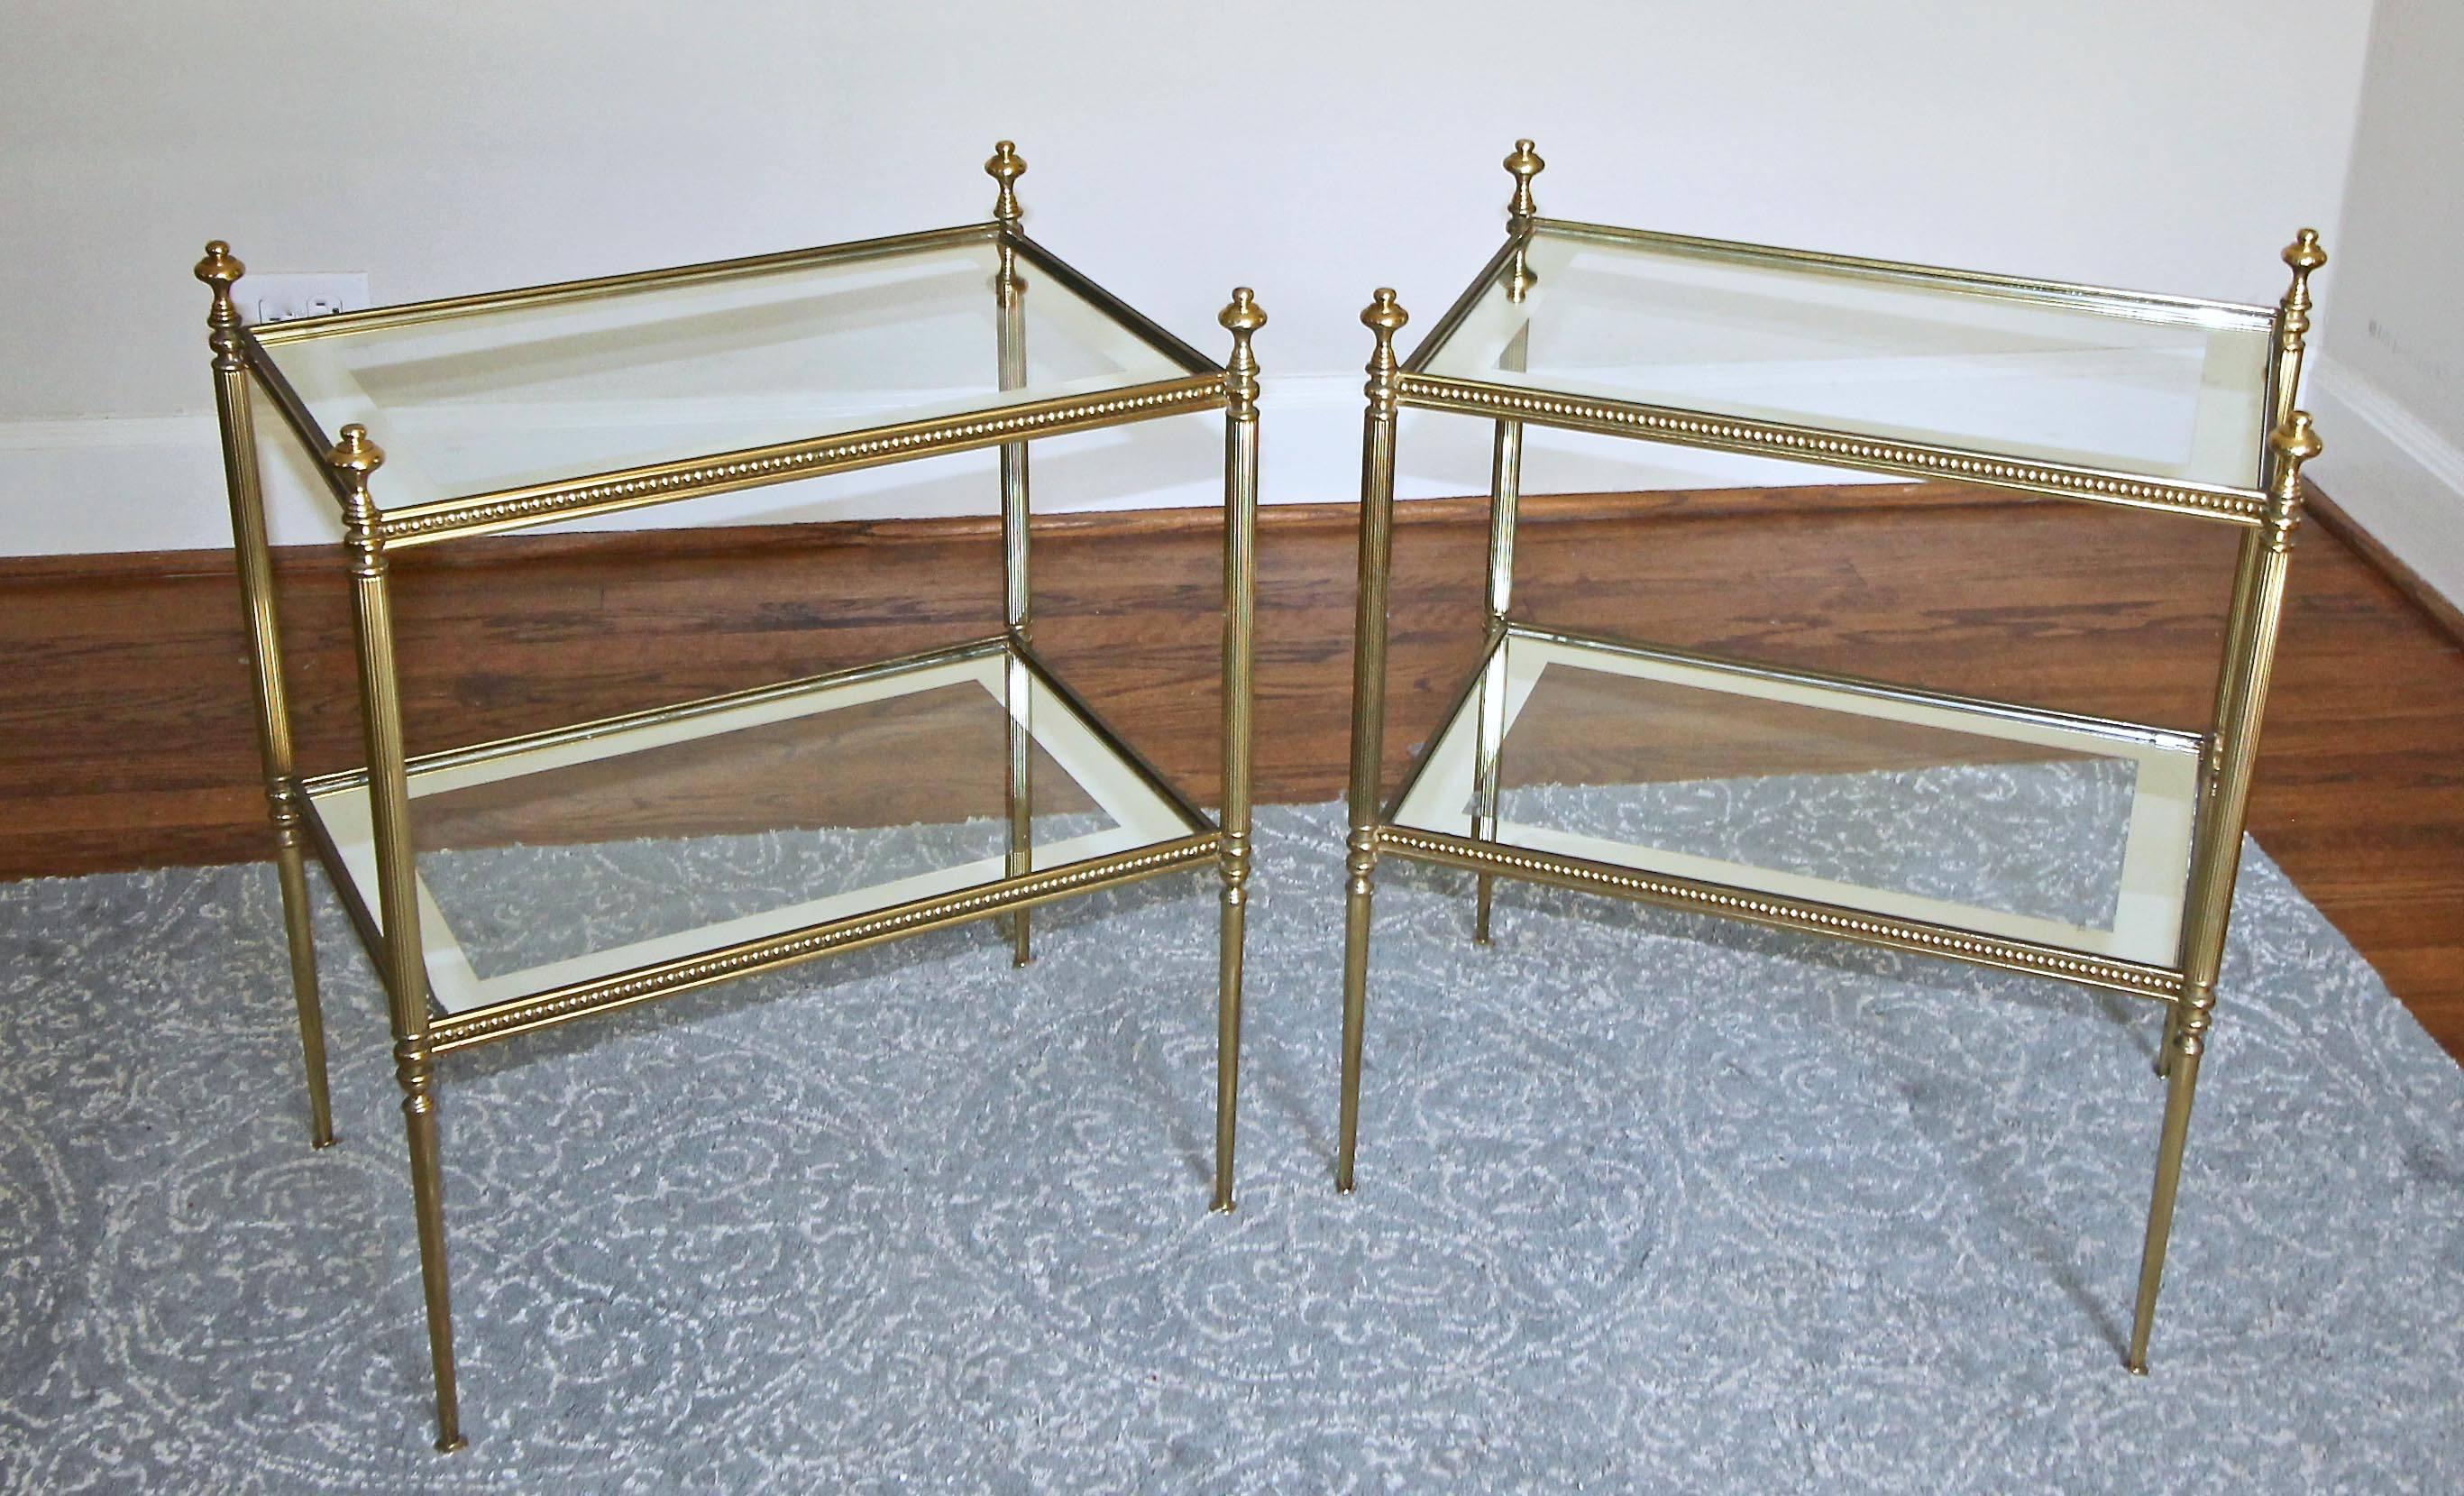 Pair of (two) French two-tier side or end tables with inset glass tops with mirrored edges in the manner of Jansen. Solid brass fittings are nicely detailed with a beautiful applied beaded detail to horizontal elements. Tables retain original finish